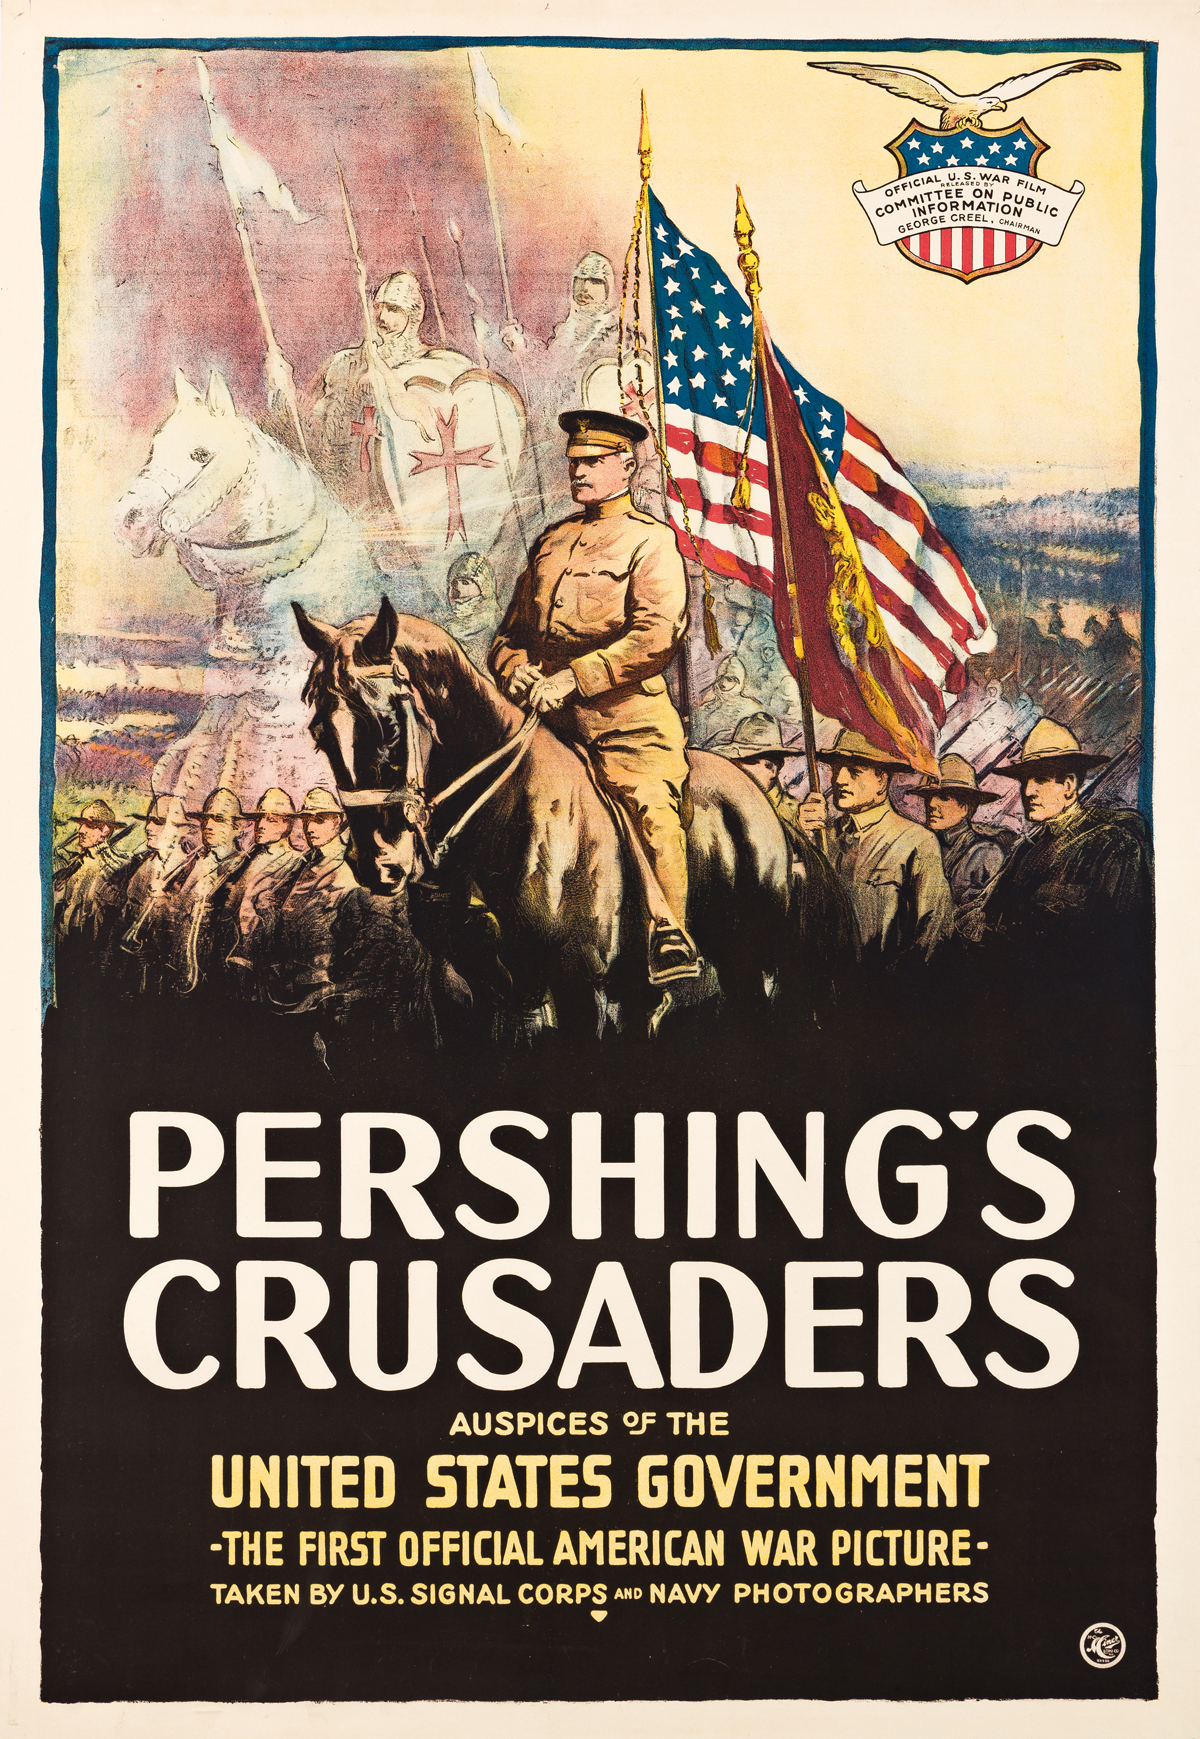 DESIGNER UNKNOWN.  PERSHINGS CRUSADERS. 1918. 41¼x28¼ inches, 104¾x71¾ cm. The H.C. Miner Litho. Co., New York.